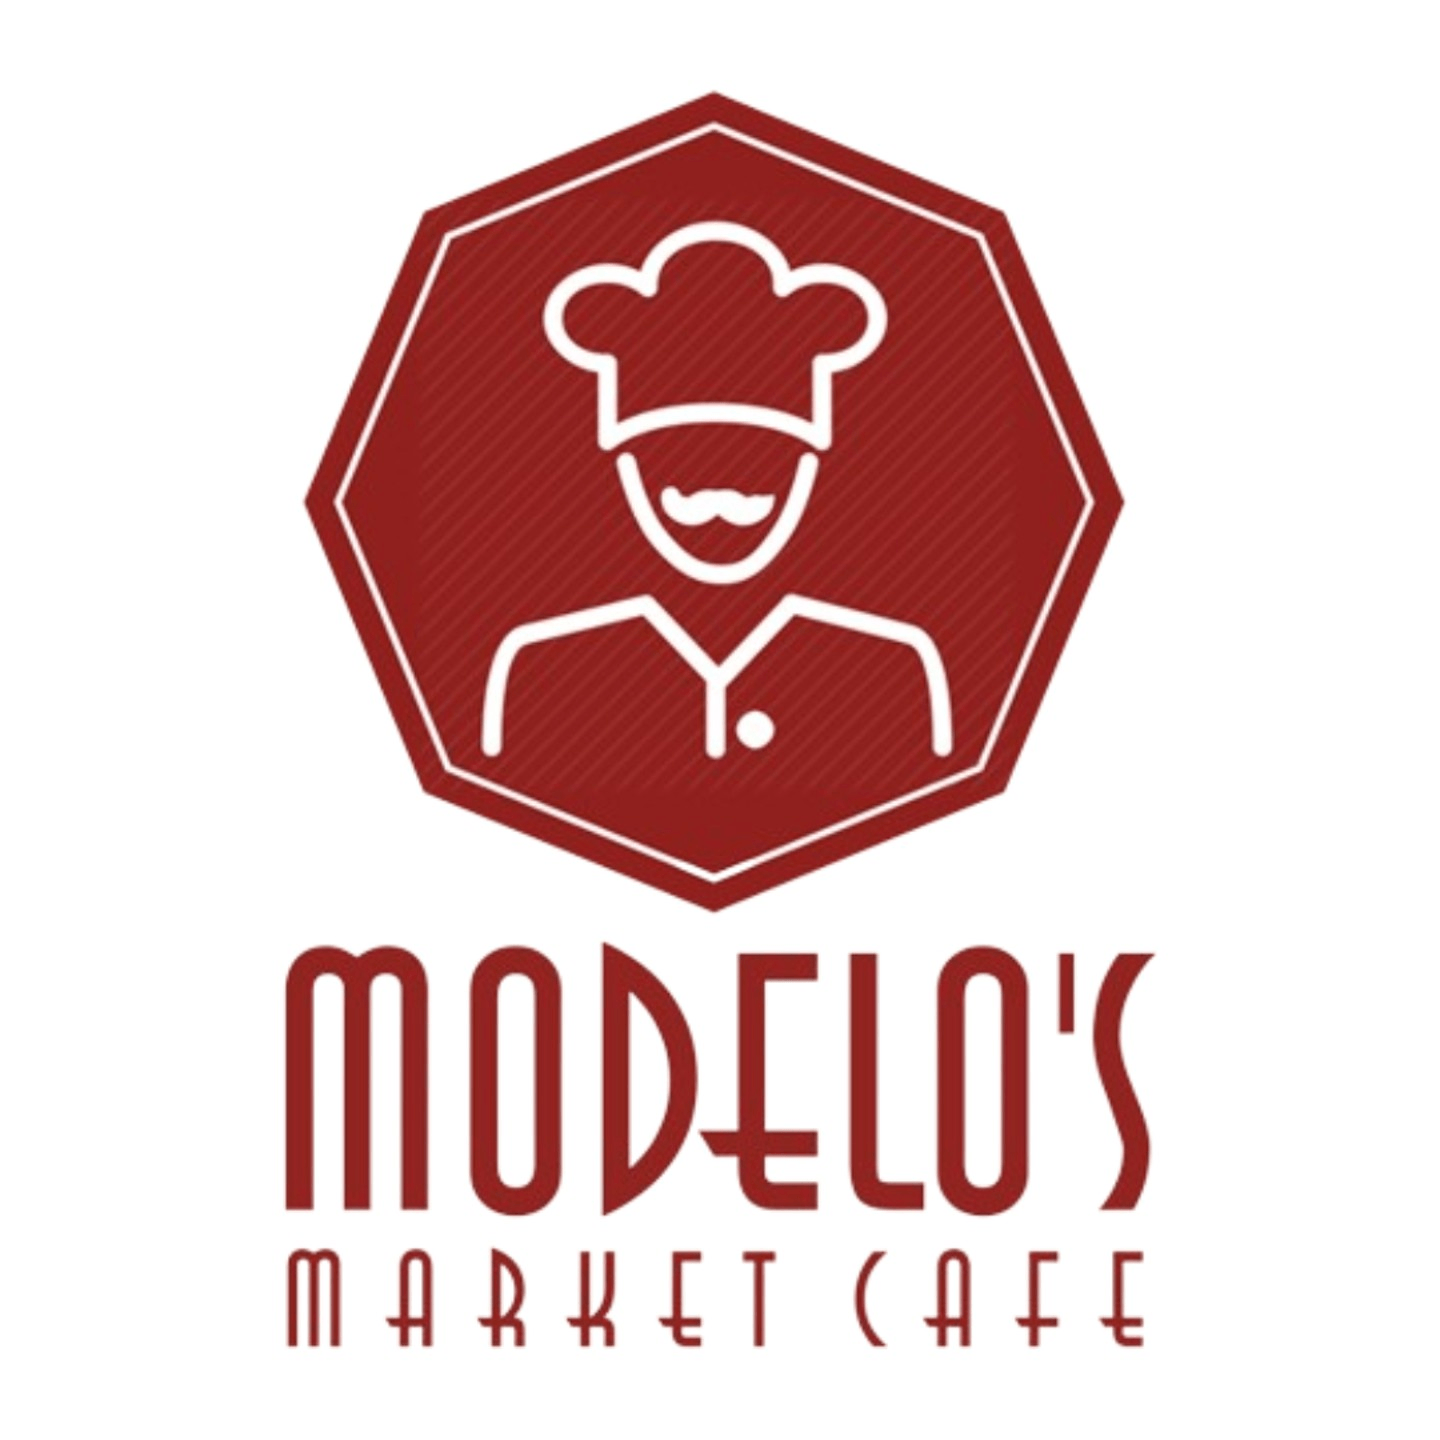 Welcome to Modelo's Market Cafe!